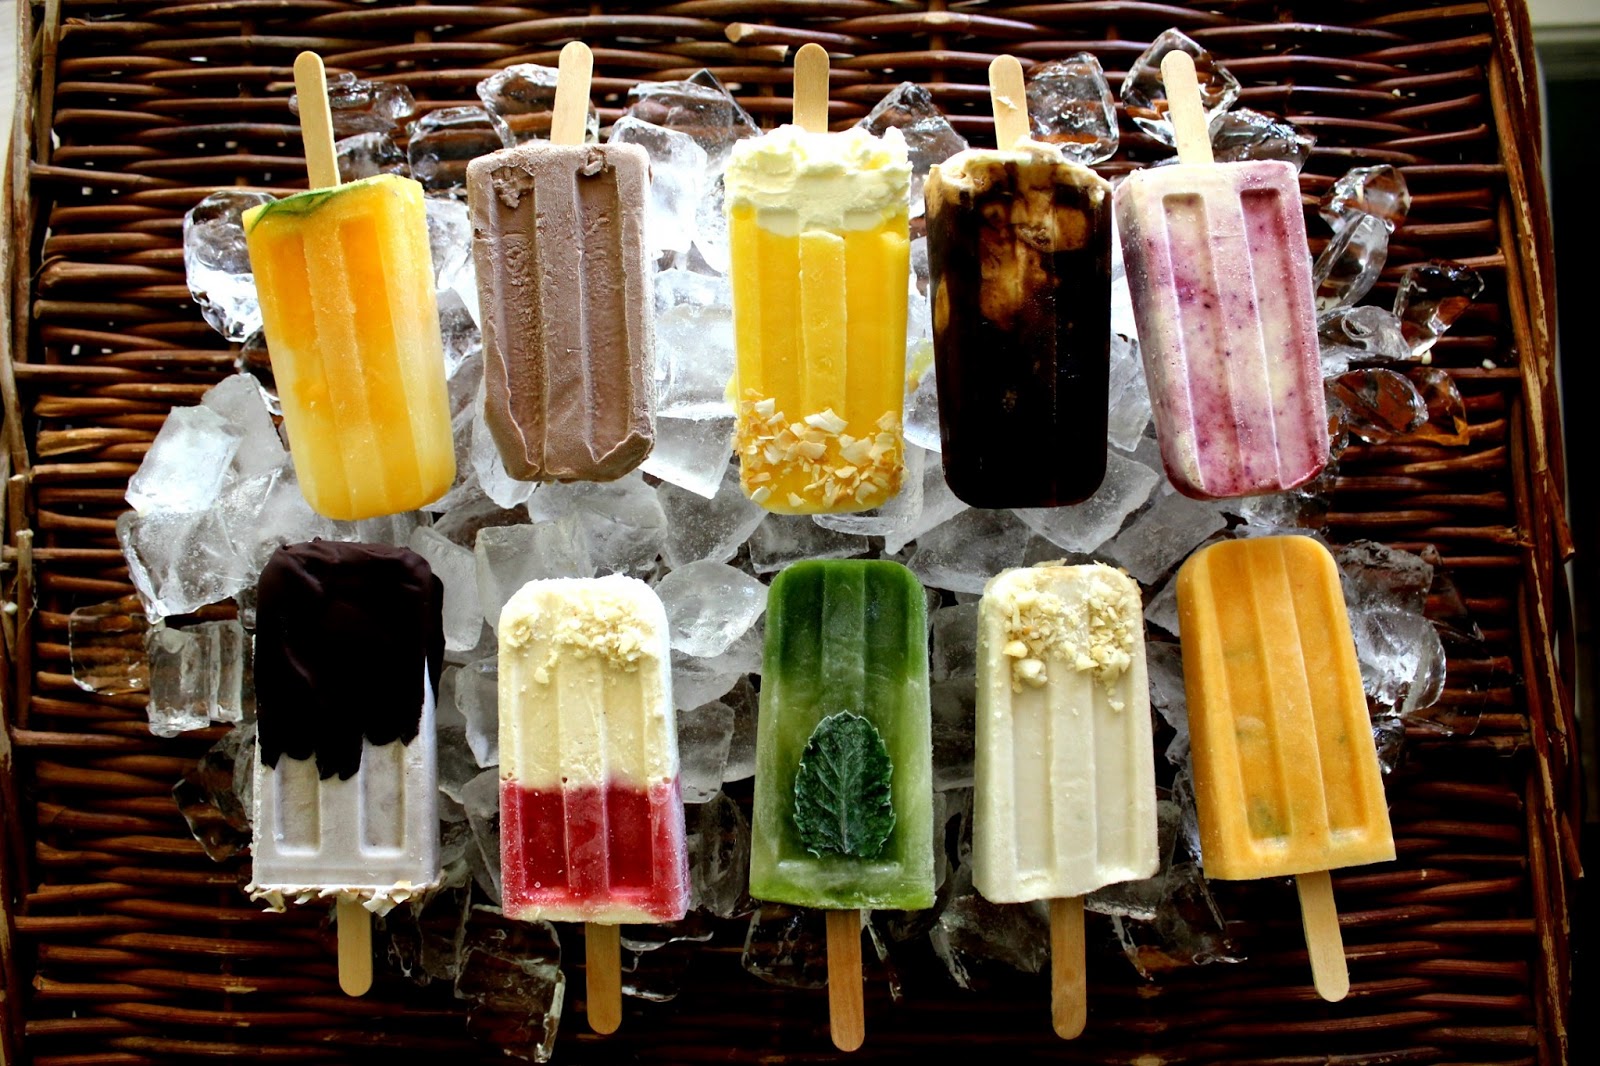 How to Make Popsicles with or without a Mold - Modern Parents